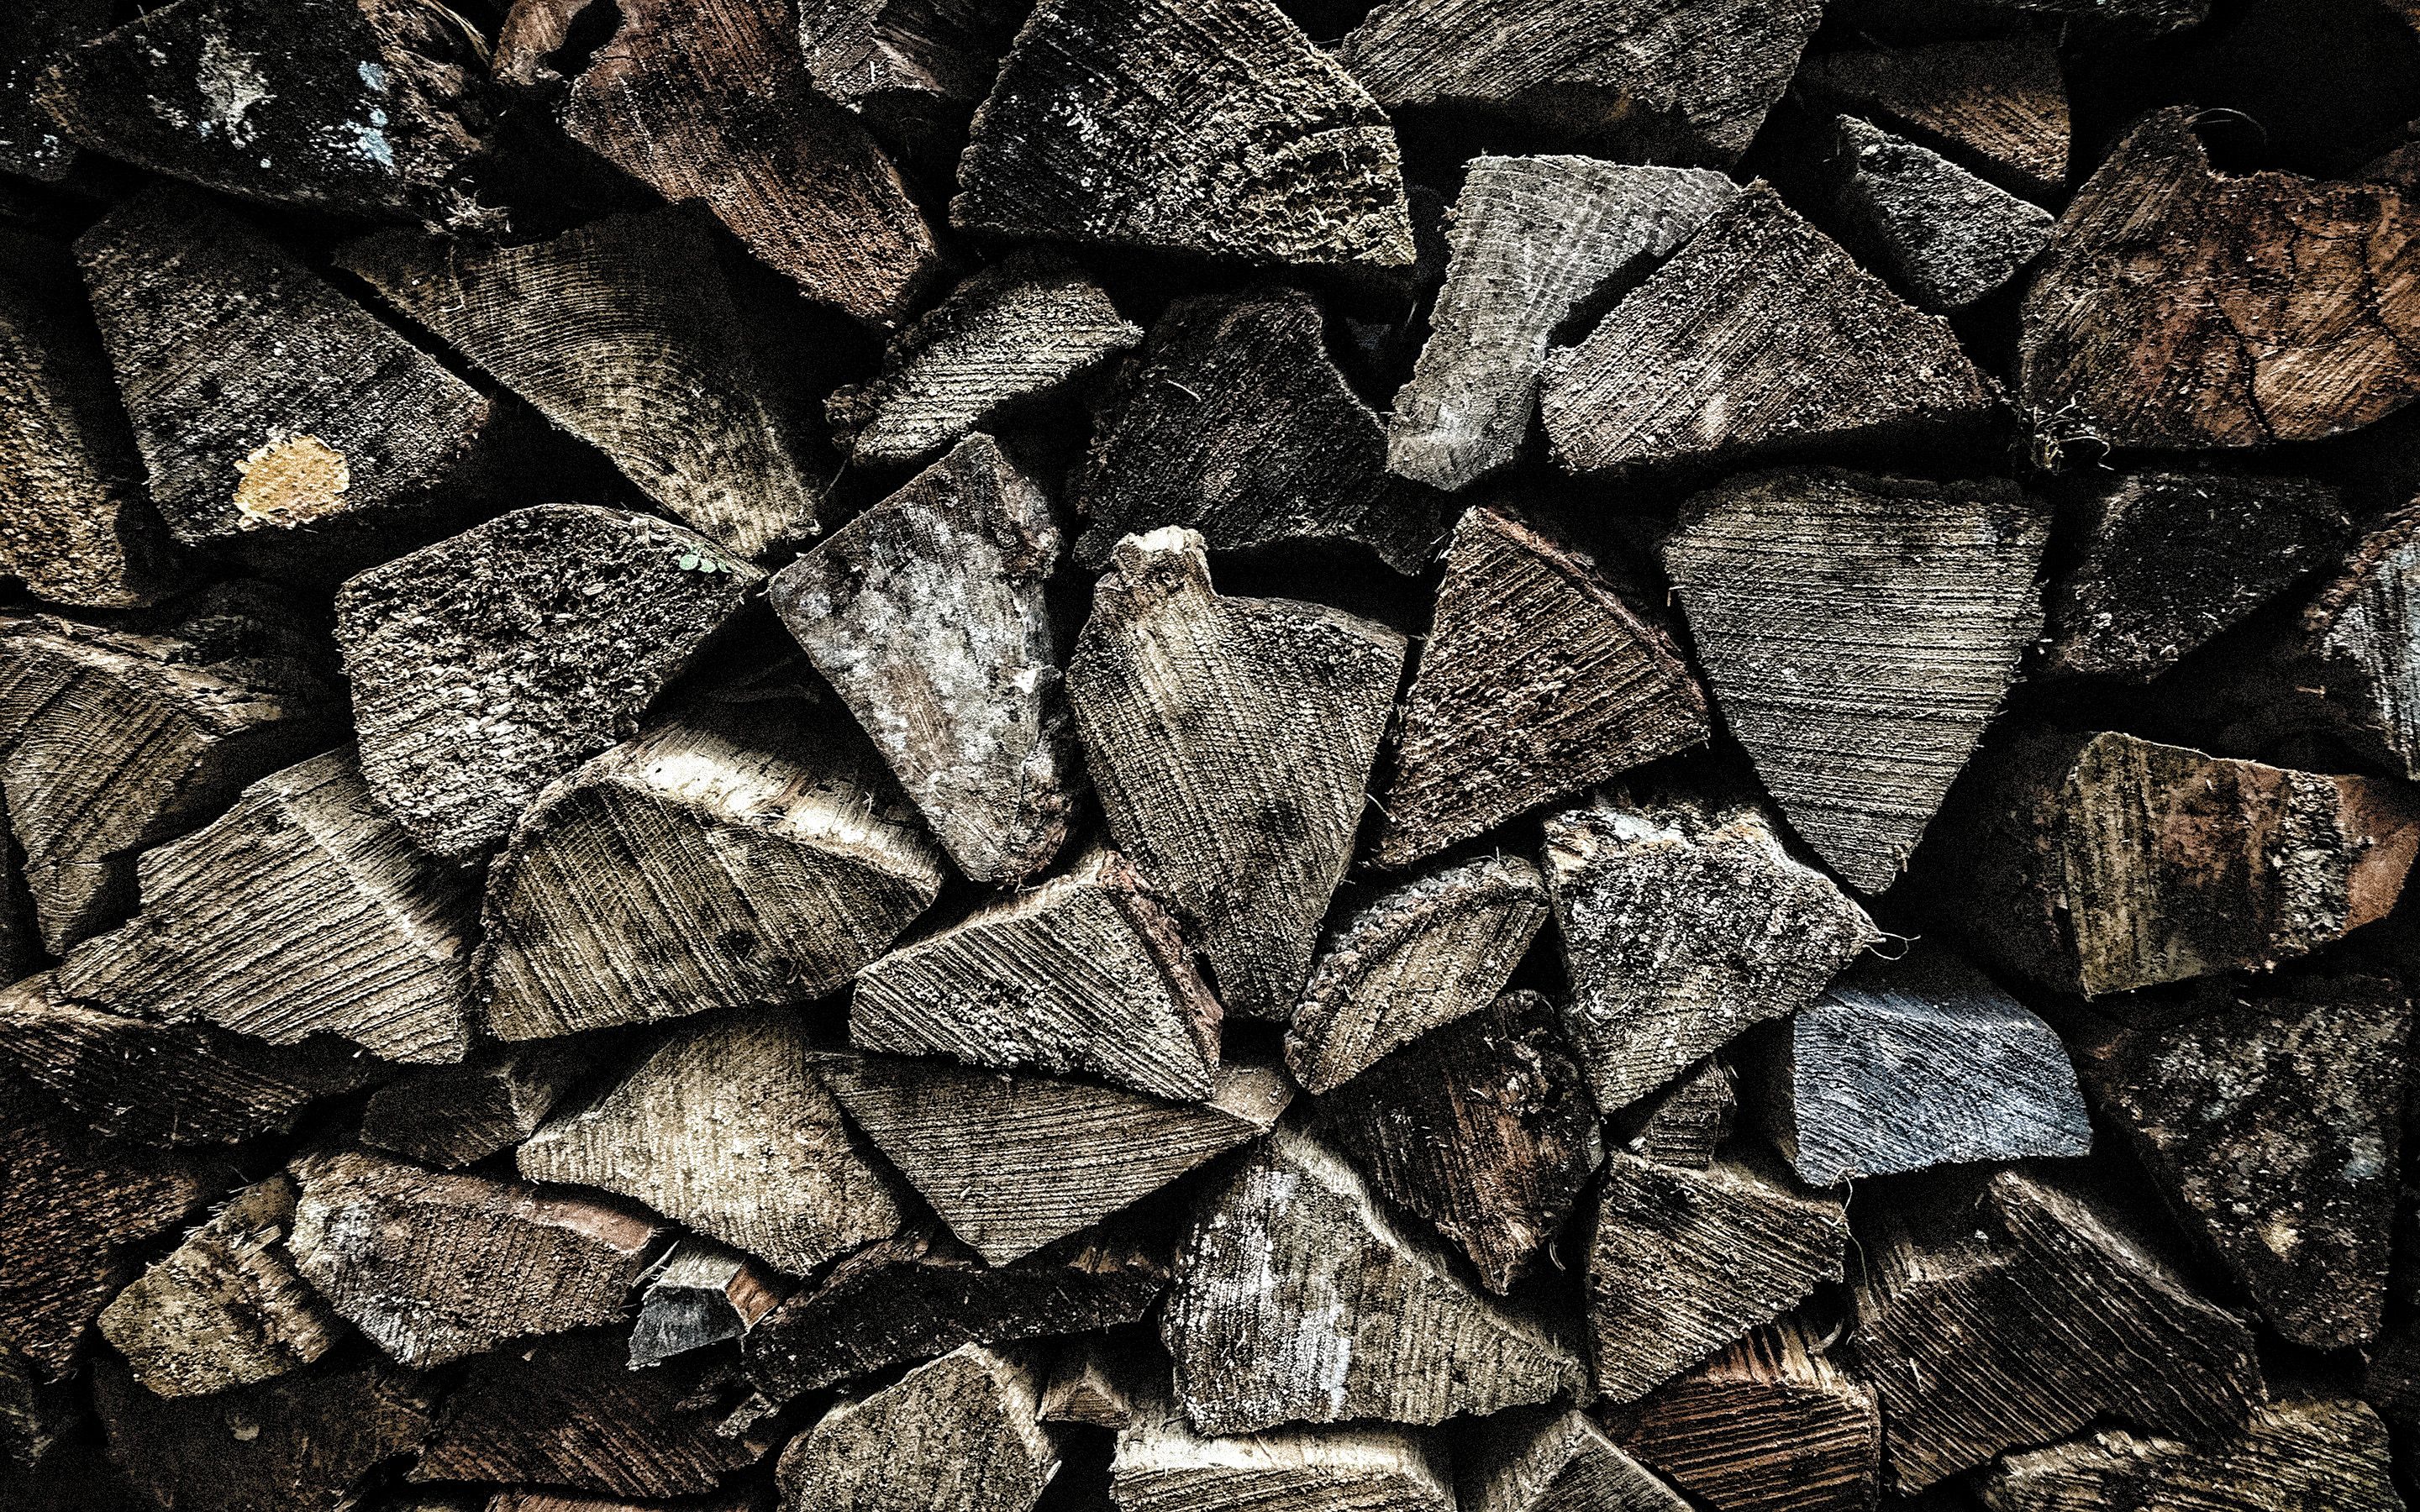 Download wallpaper wood log texture, firewood texture, Stacked wood logs, logging concepts, wood texture, wooden background for desktop with resolution 2880x1800. High Quality HD picture wallpaper